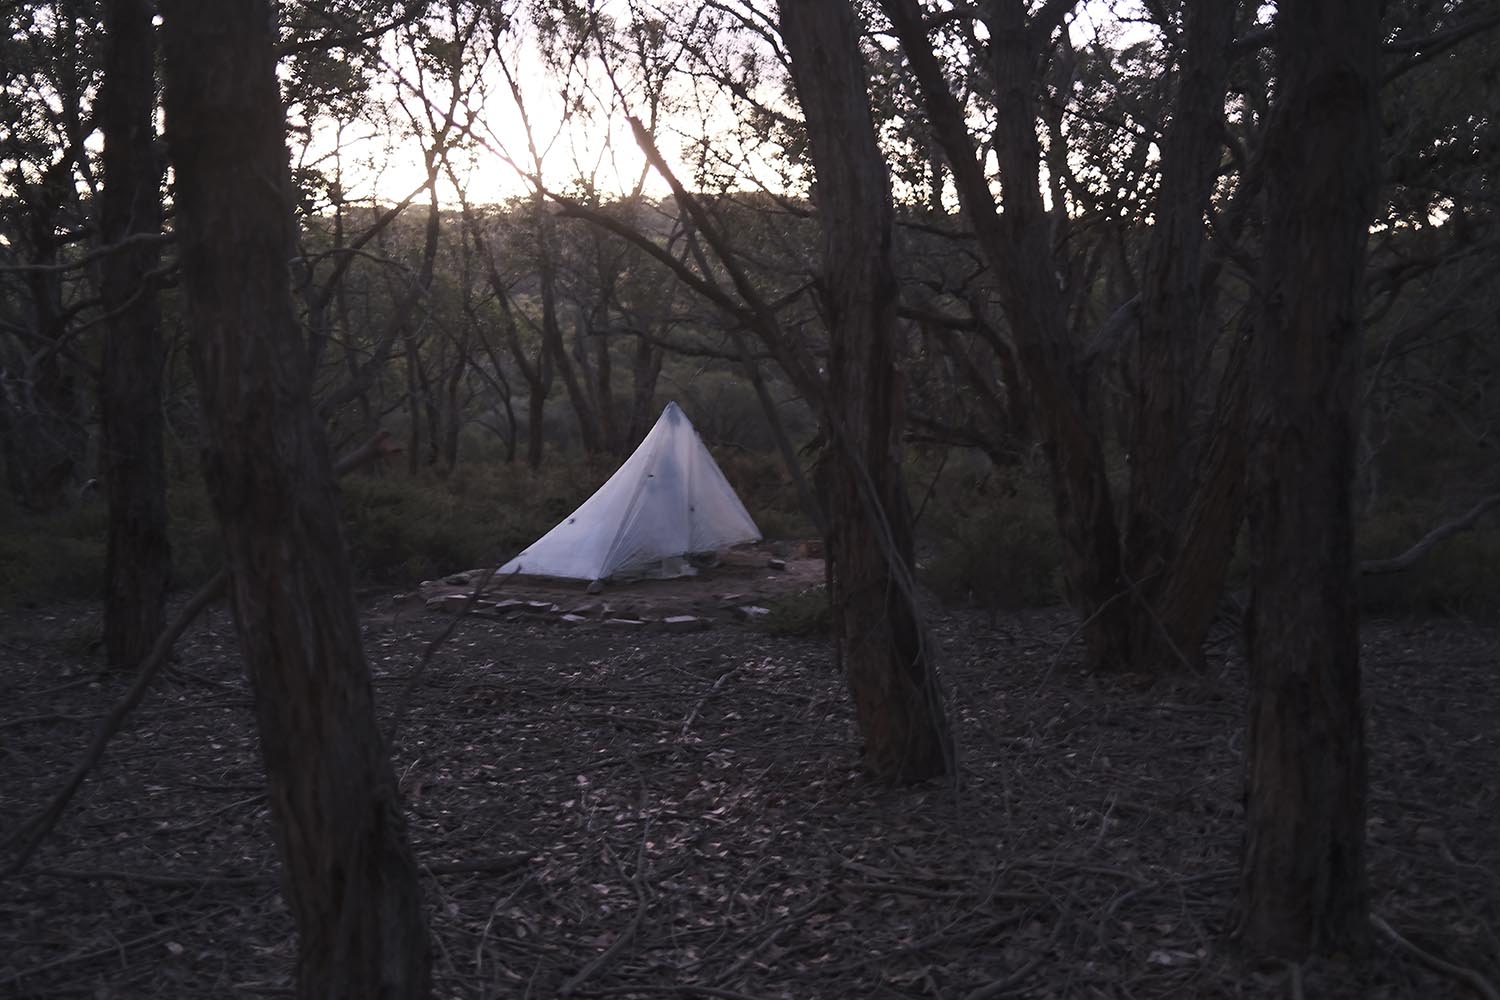 Campsite along the southern parts of the Heysen Trail at sunset with DCF shelter.